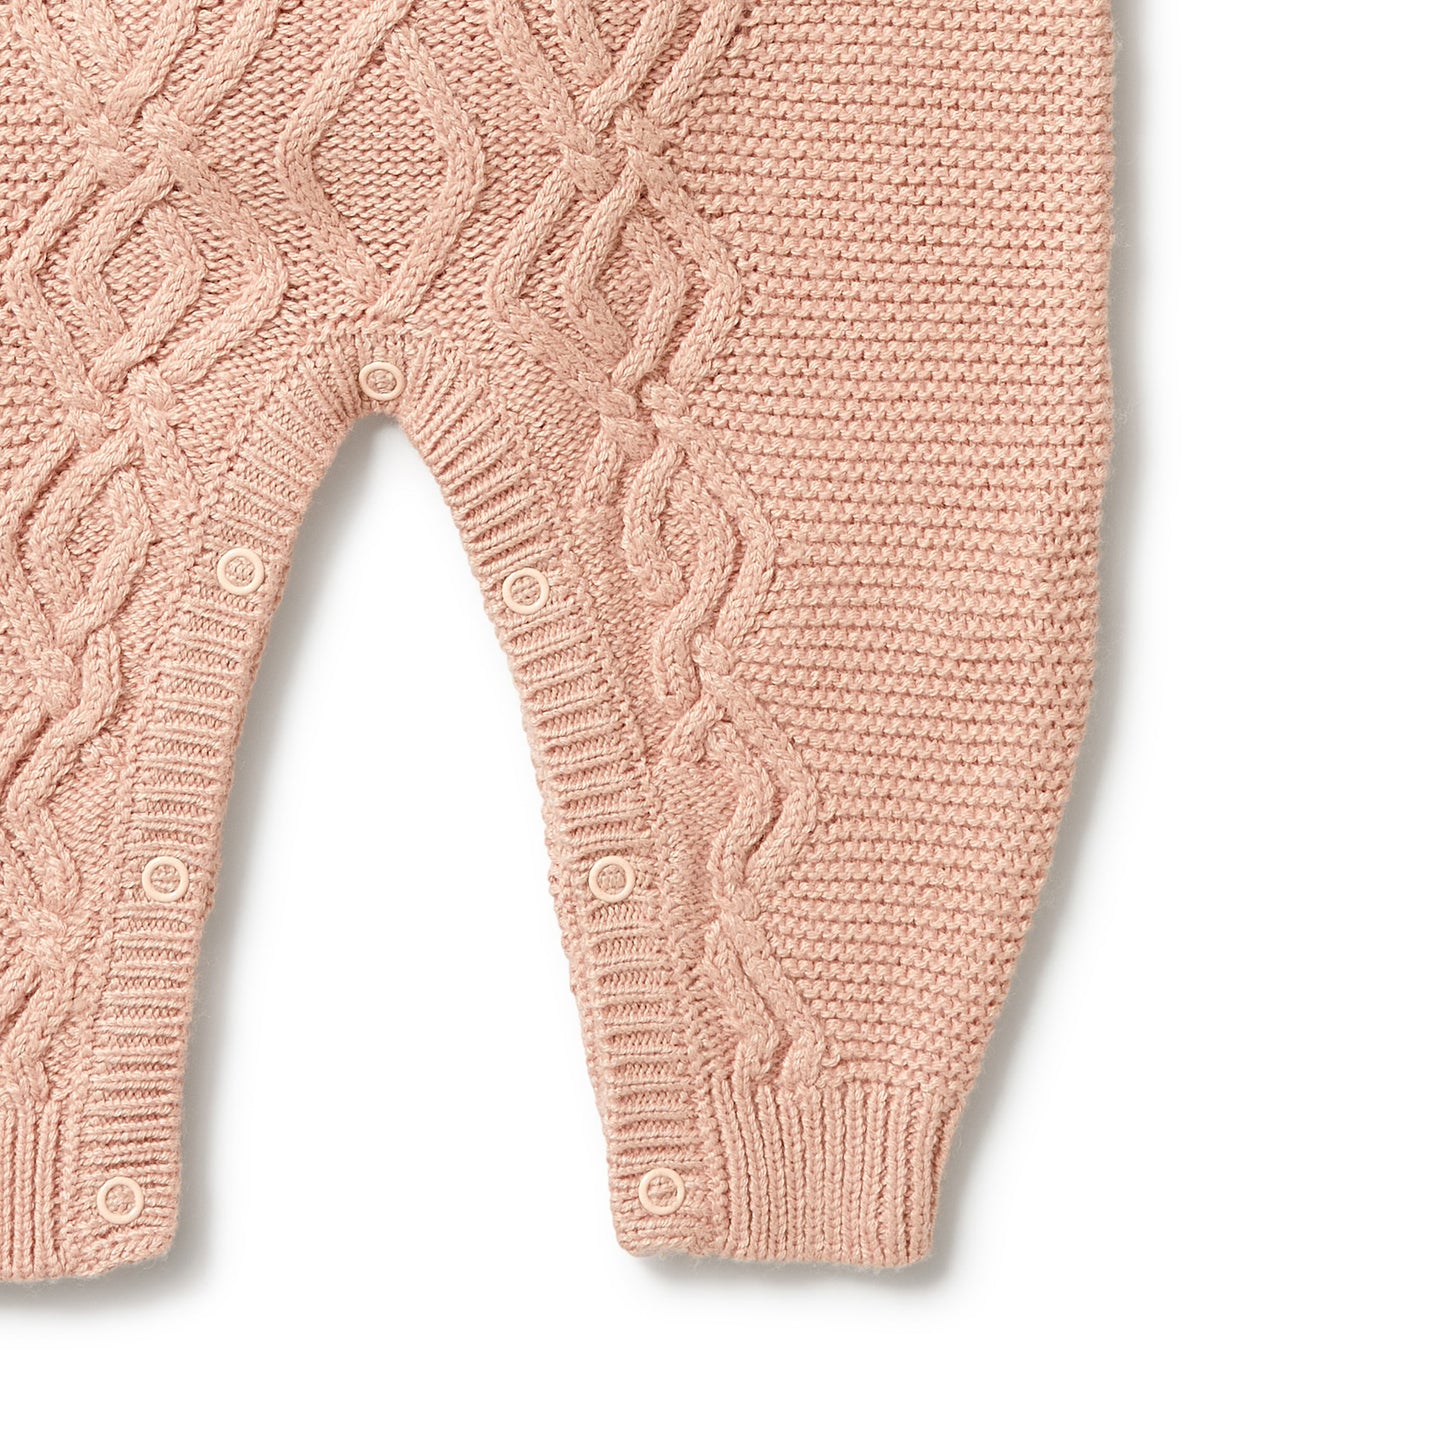 Wilson & Frenchy Knitted Cable Growsuit - Rose